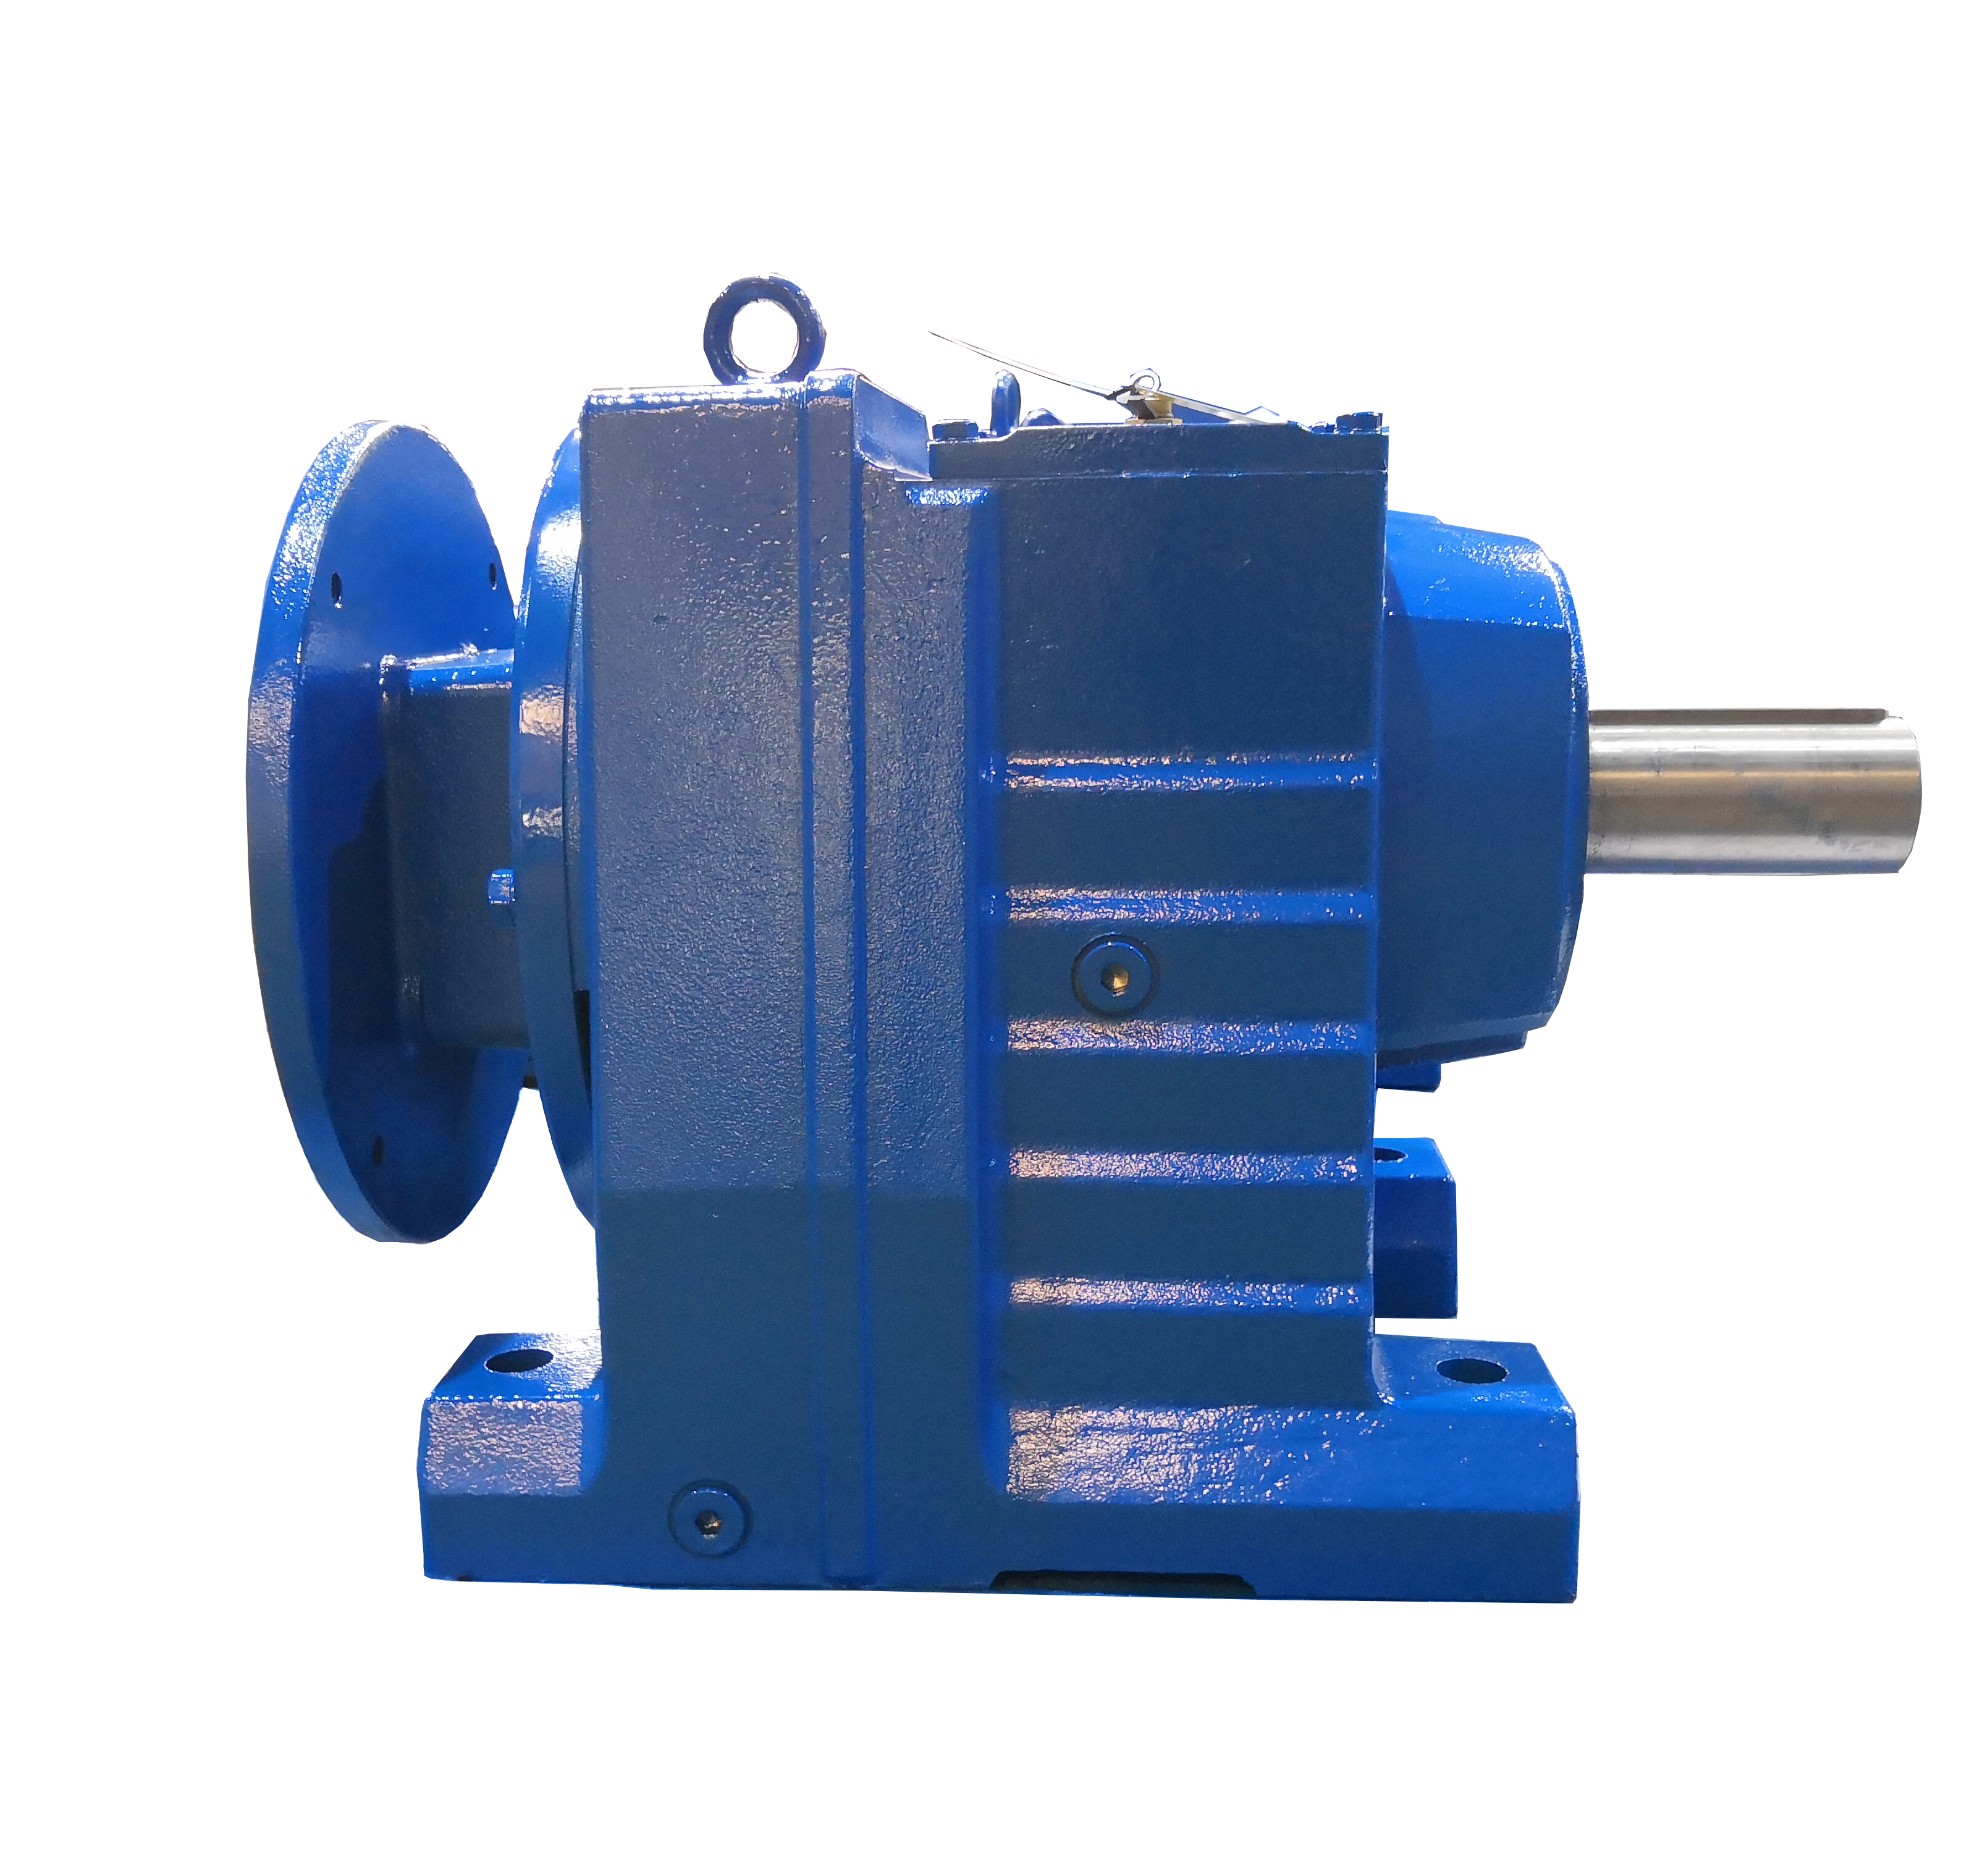 Zhejiang Speed Reductor Gearbox Industry Gear Box Transmission Reducer Gearbox